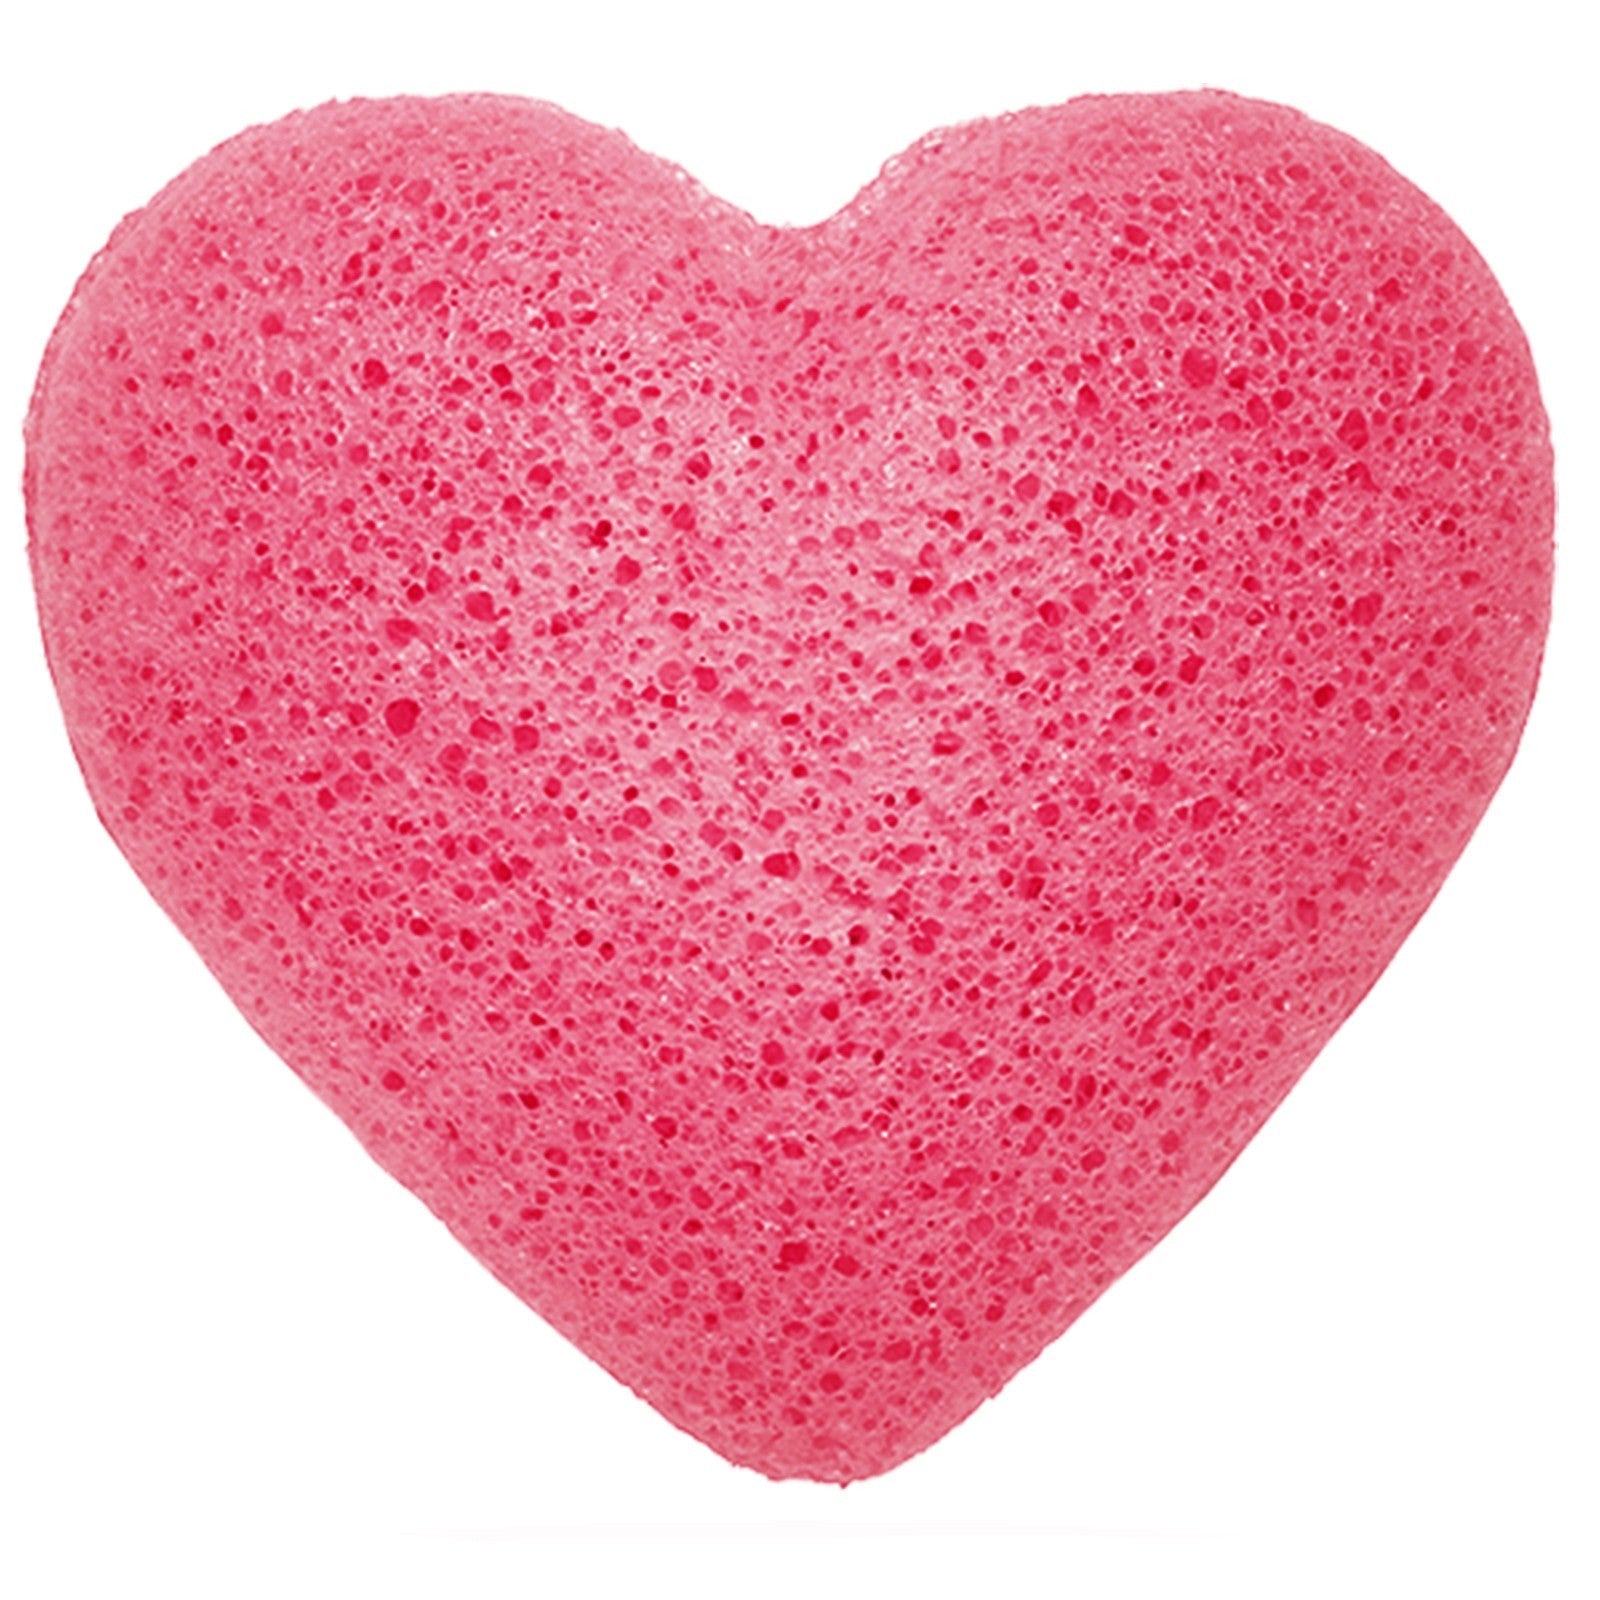 Japanese Konjac Sponge Japanese Konjac Sponges Soul Inspired Pink Heart 